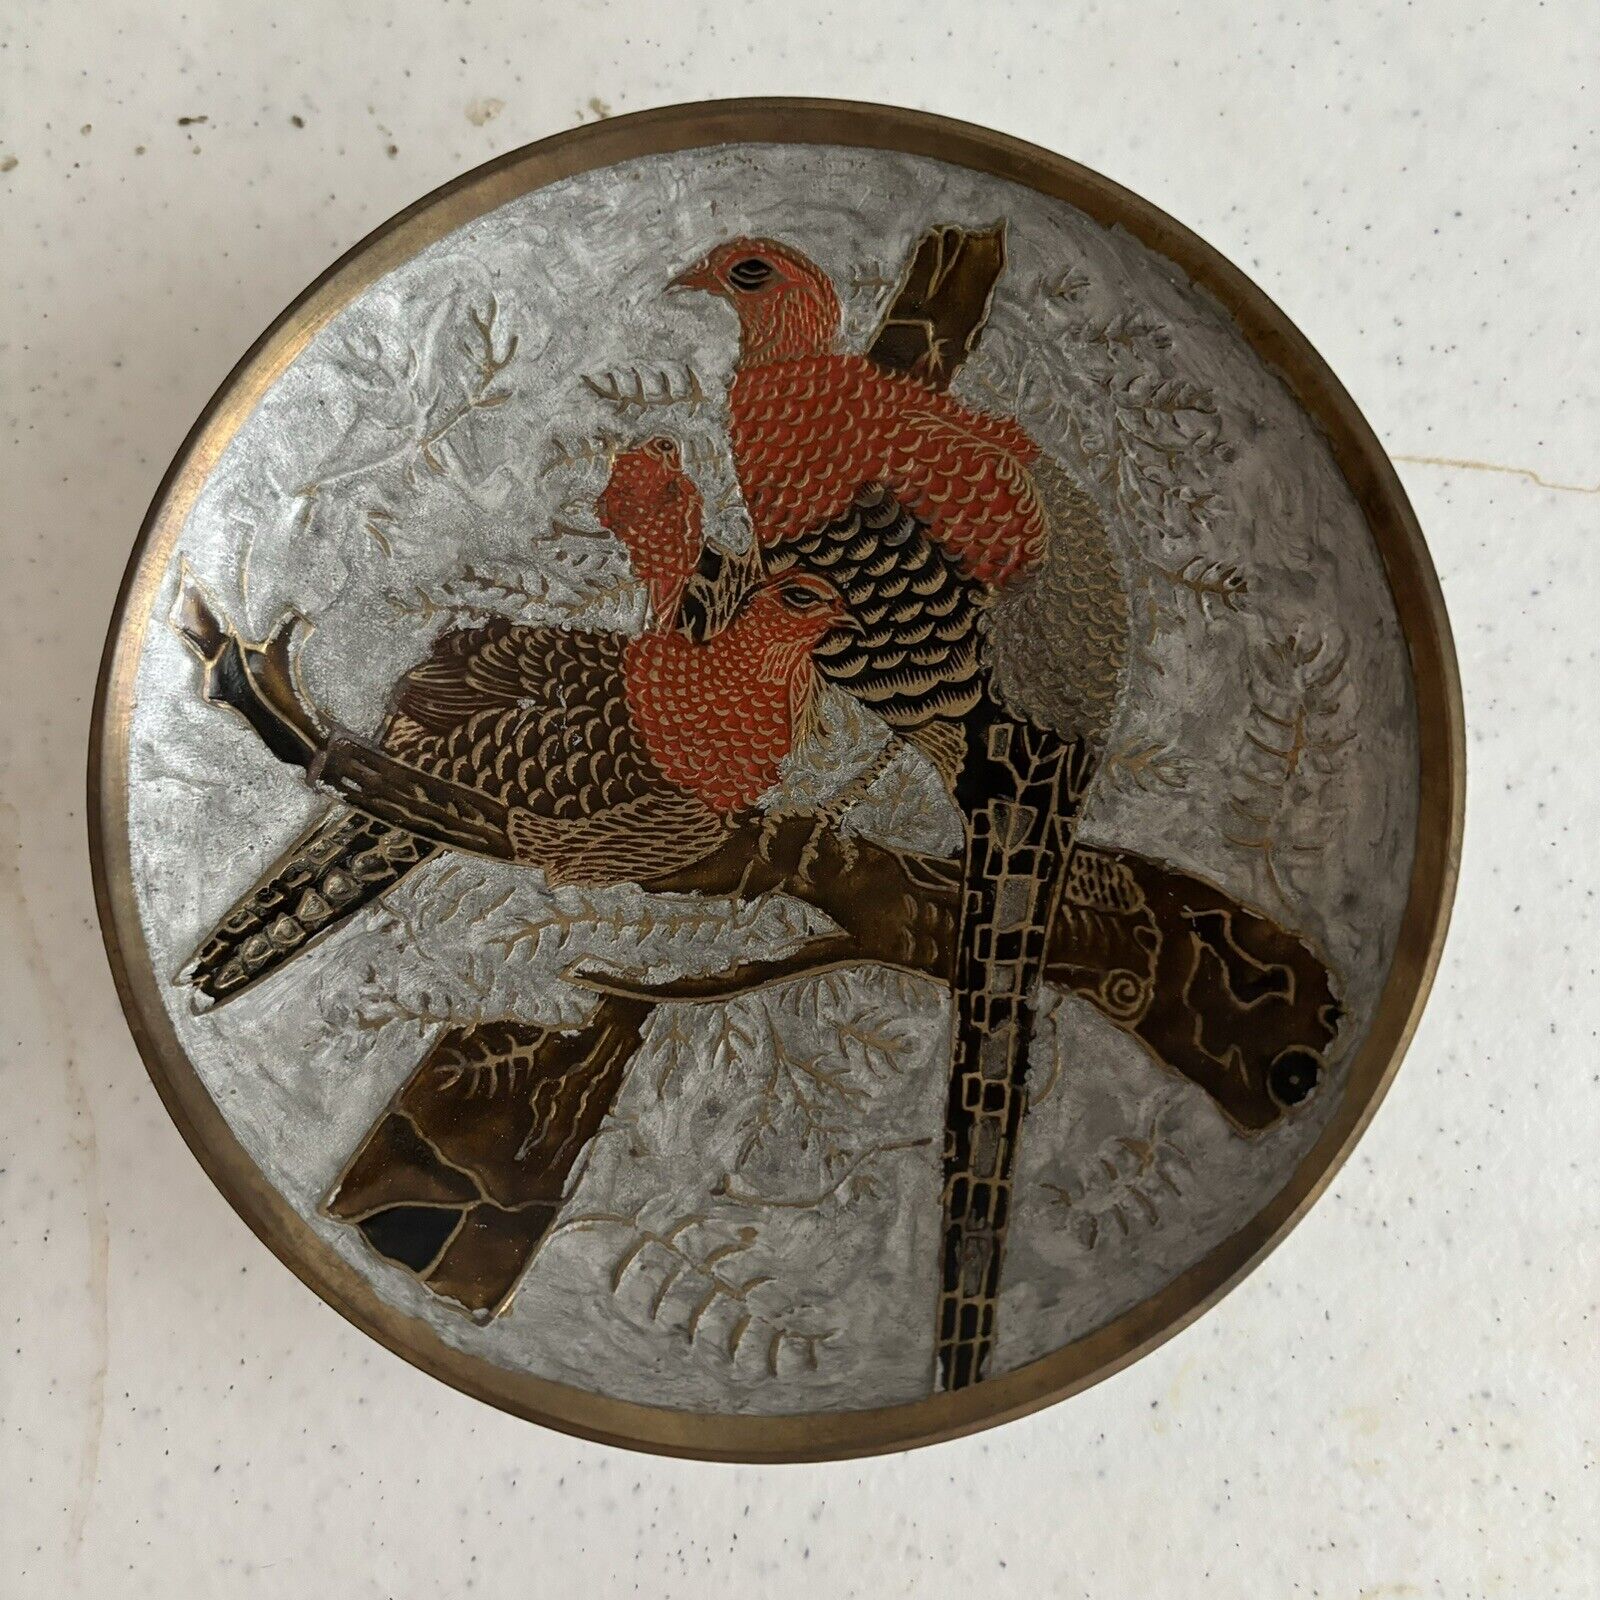 Metal cloisonné footed bowl with birds